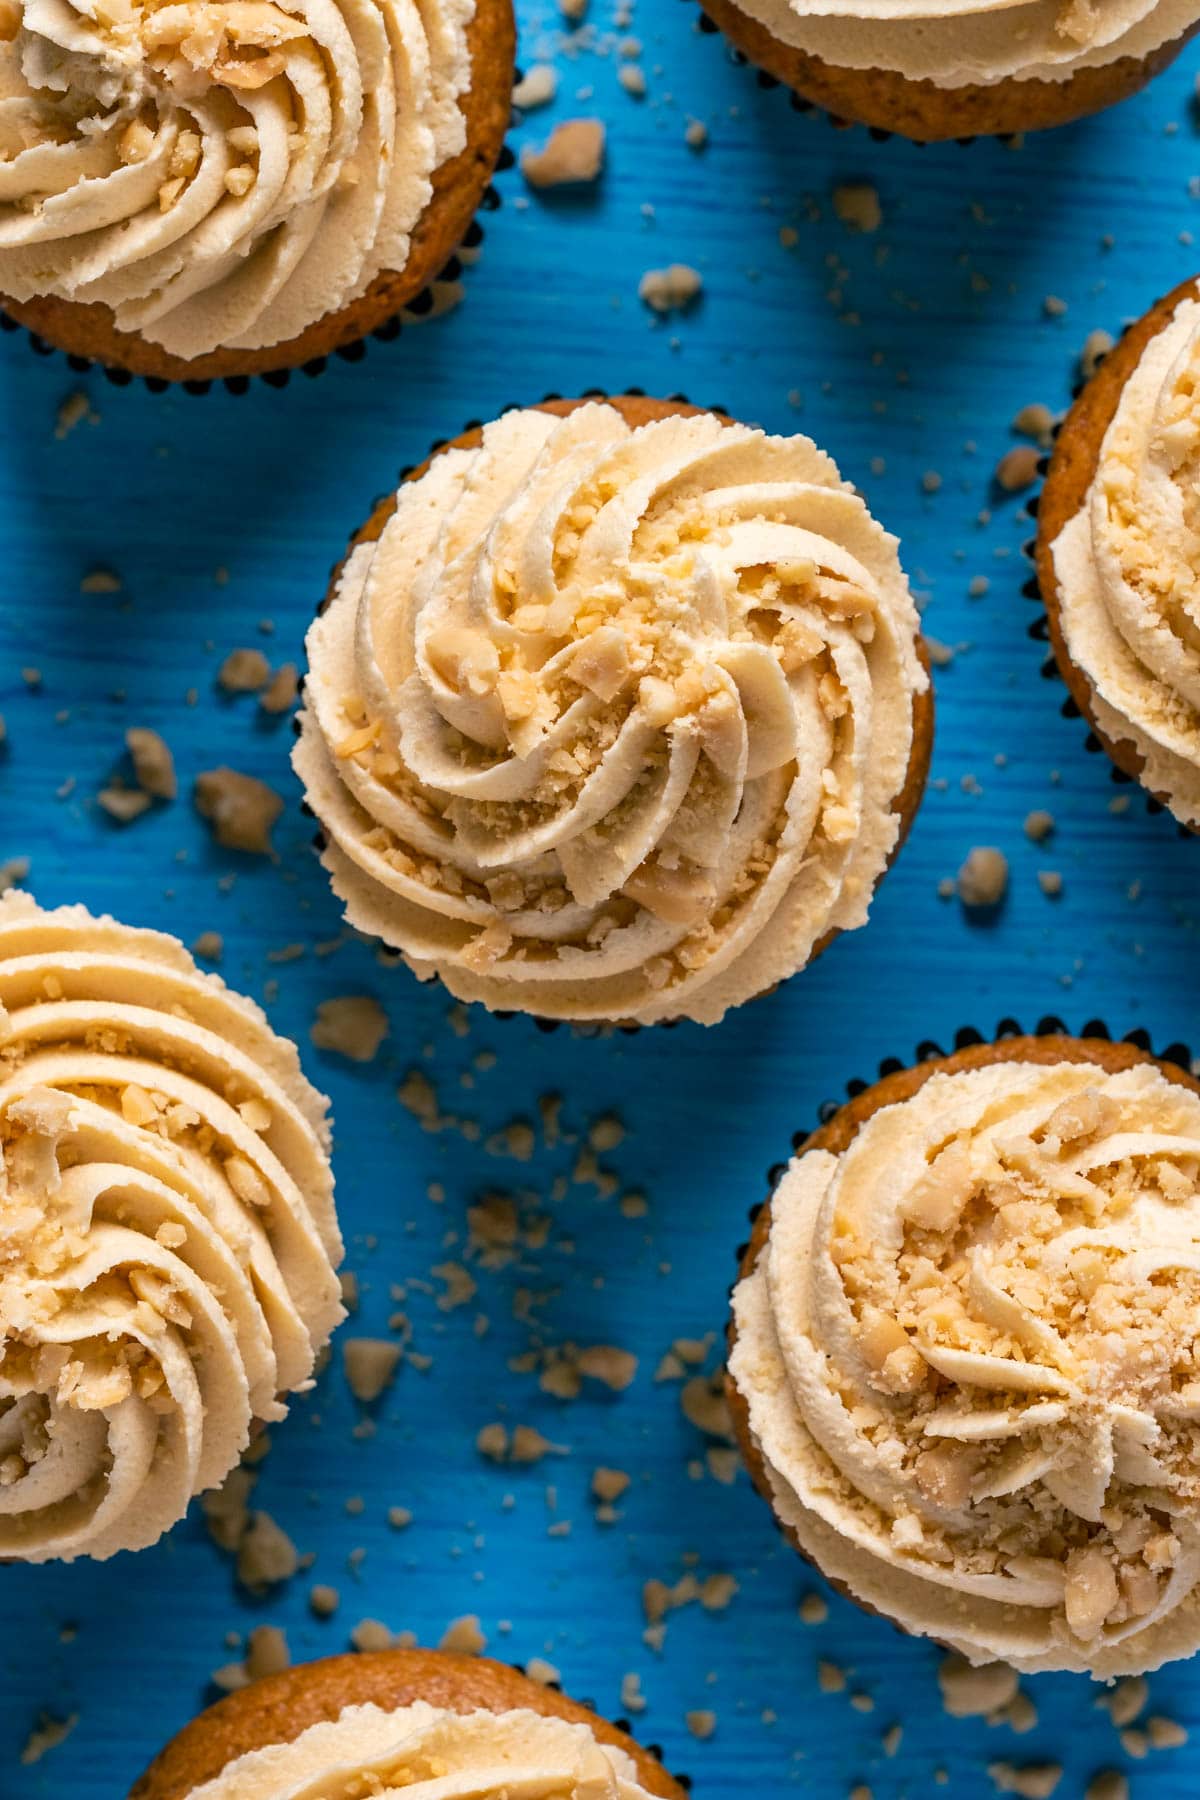 Cupcakes frosted with vegan peanut butter frosting and topped with crushed peanuts.